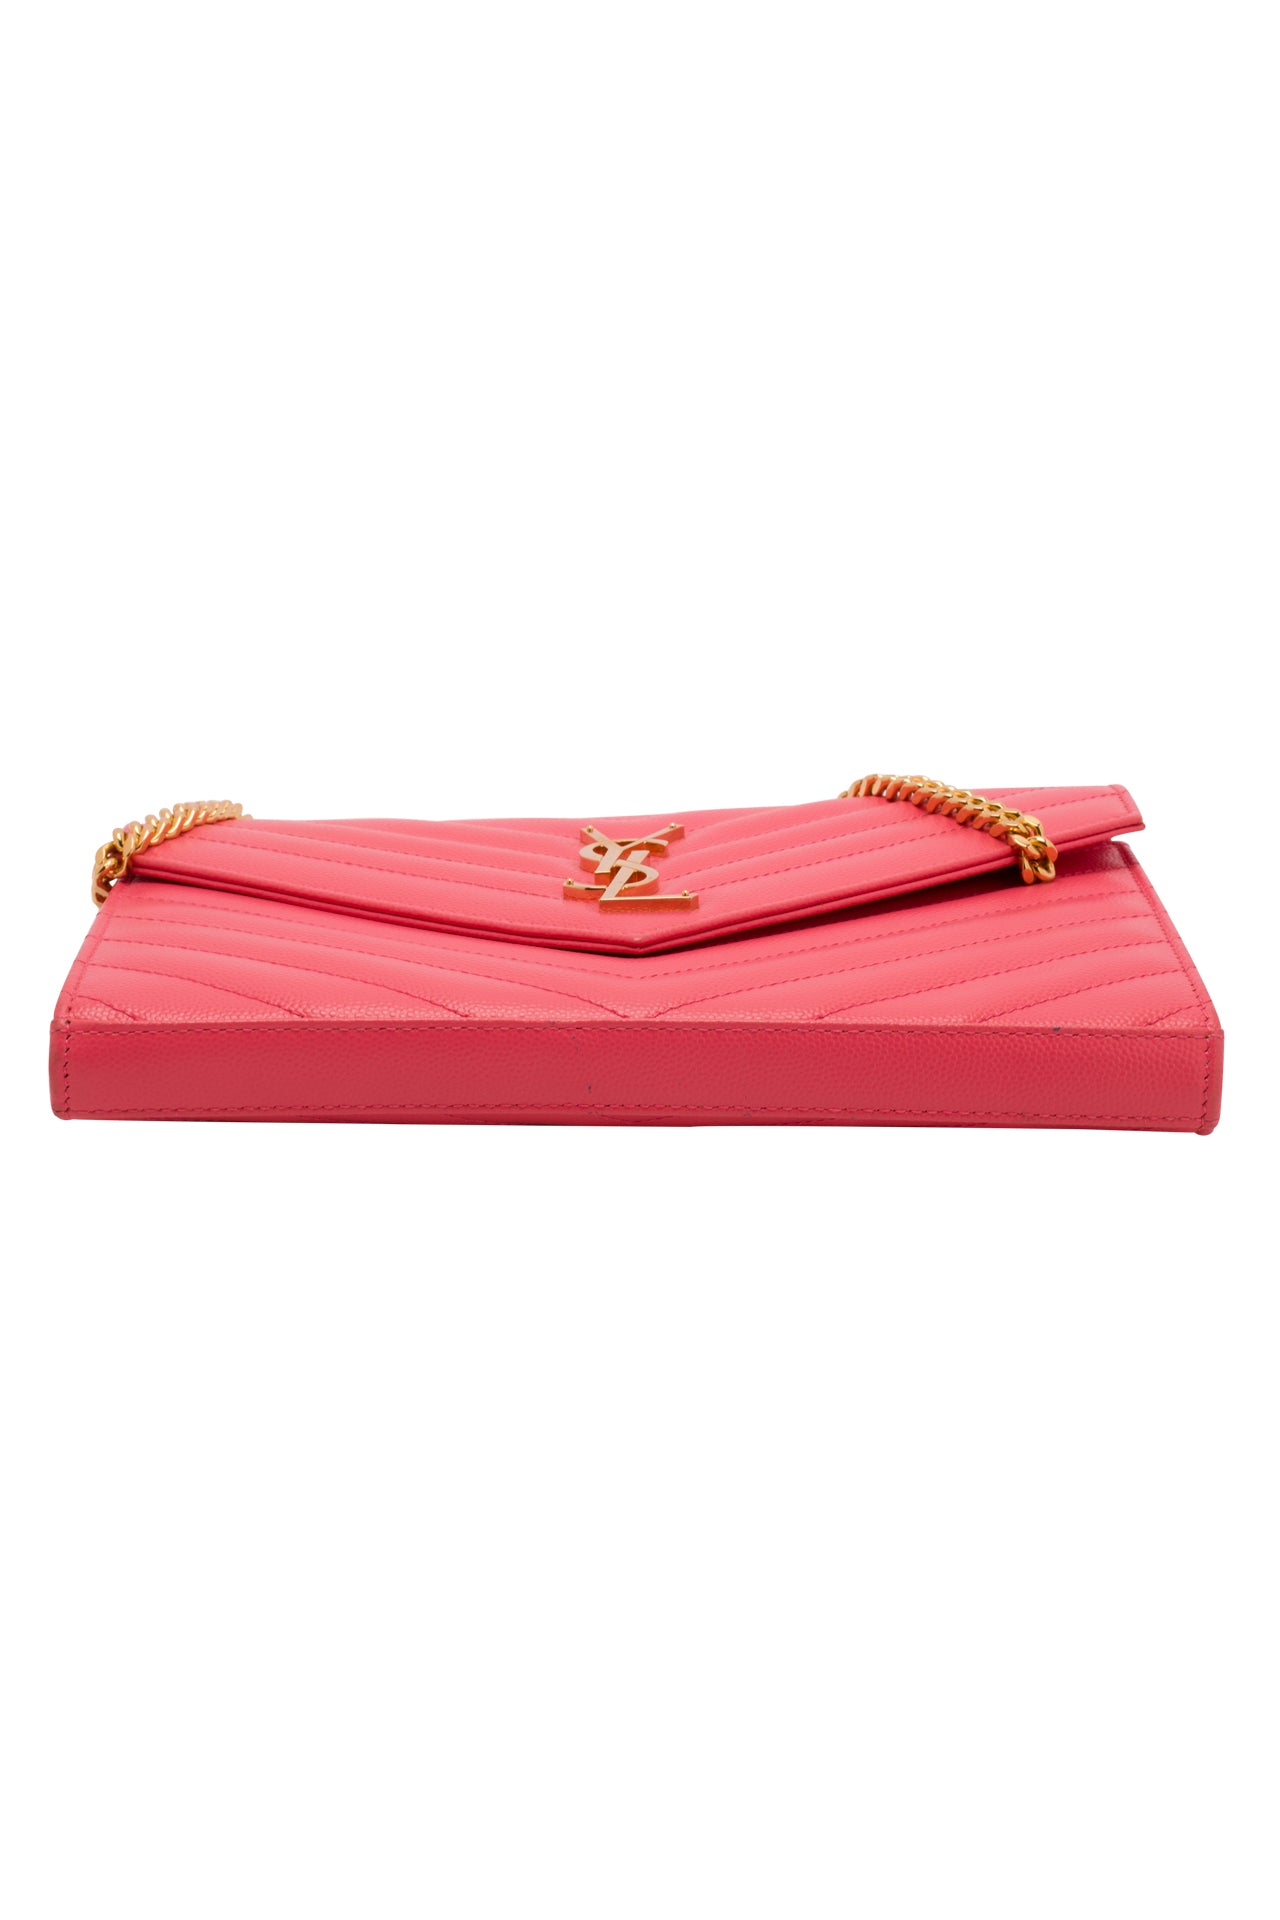 Saint Laurent Pink Quilted Leather Matelasse Wallet on Chain